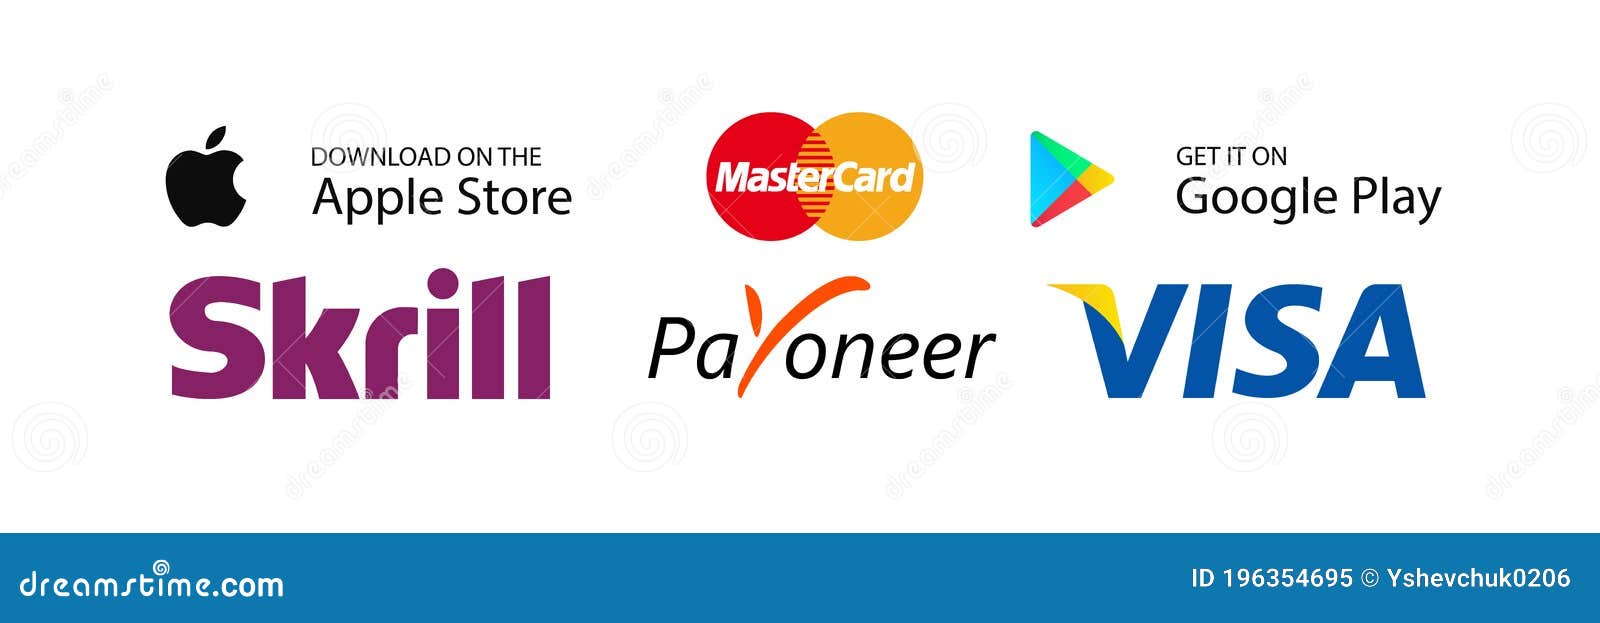 Solved: Help About getting my earning to payoneer - Adobe Community - 